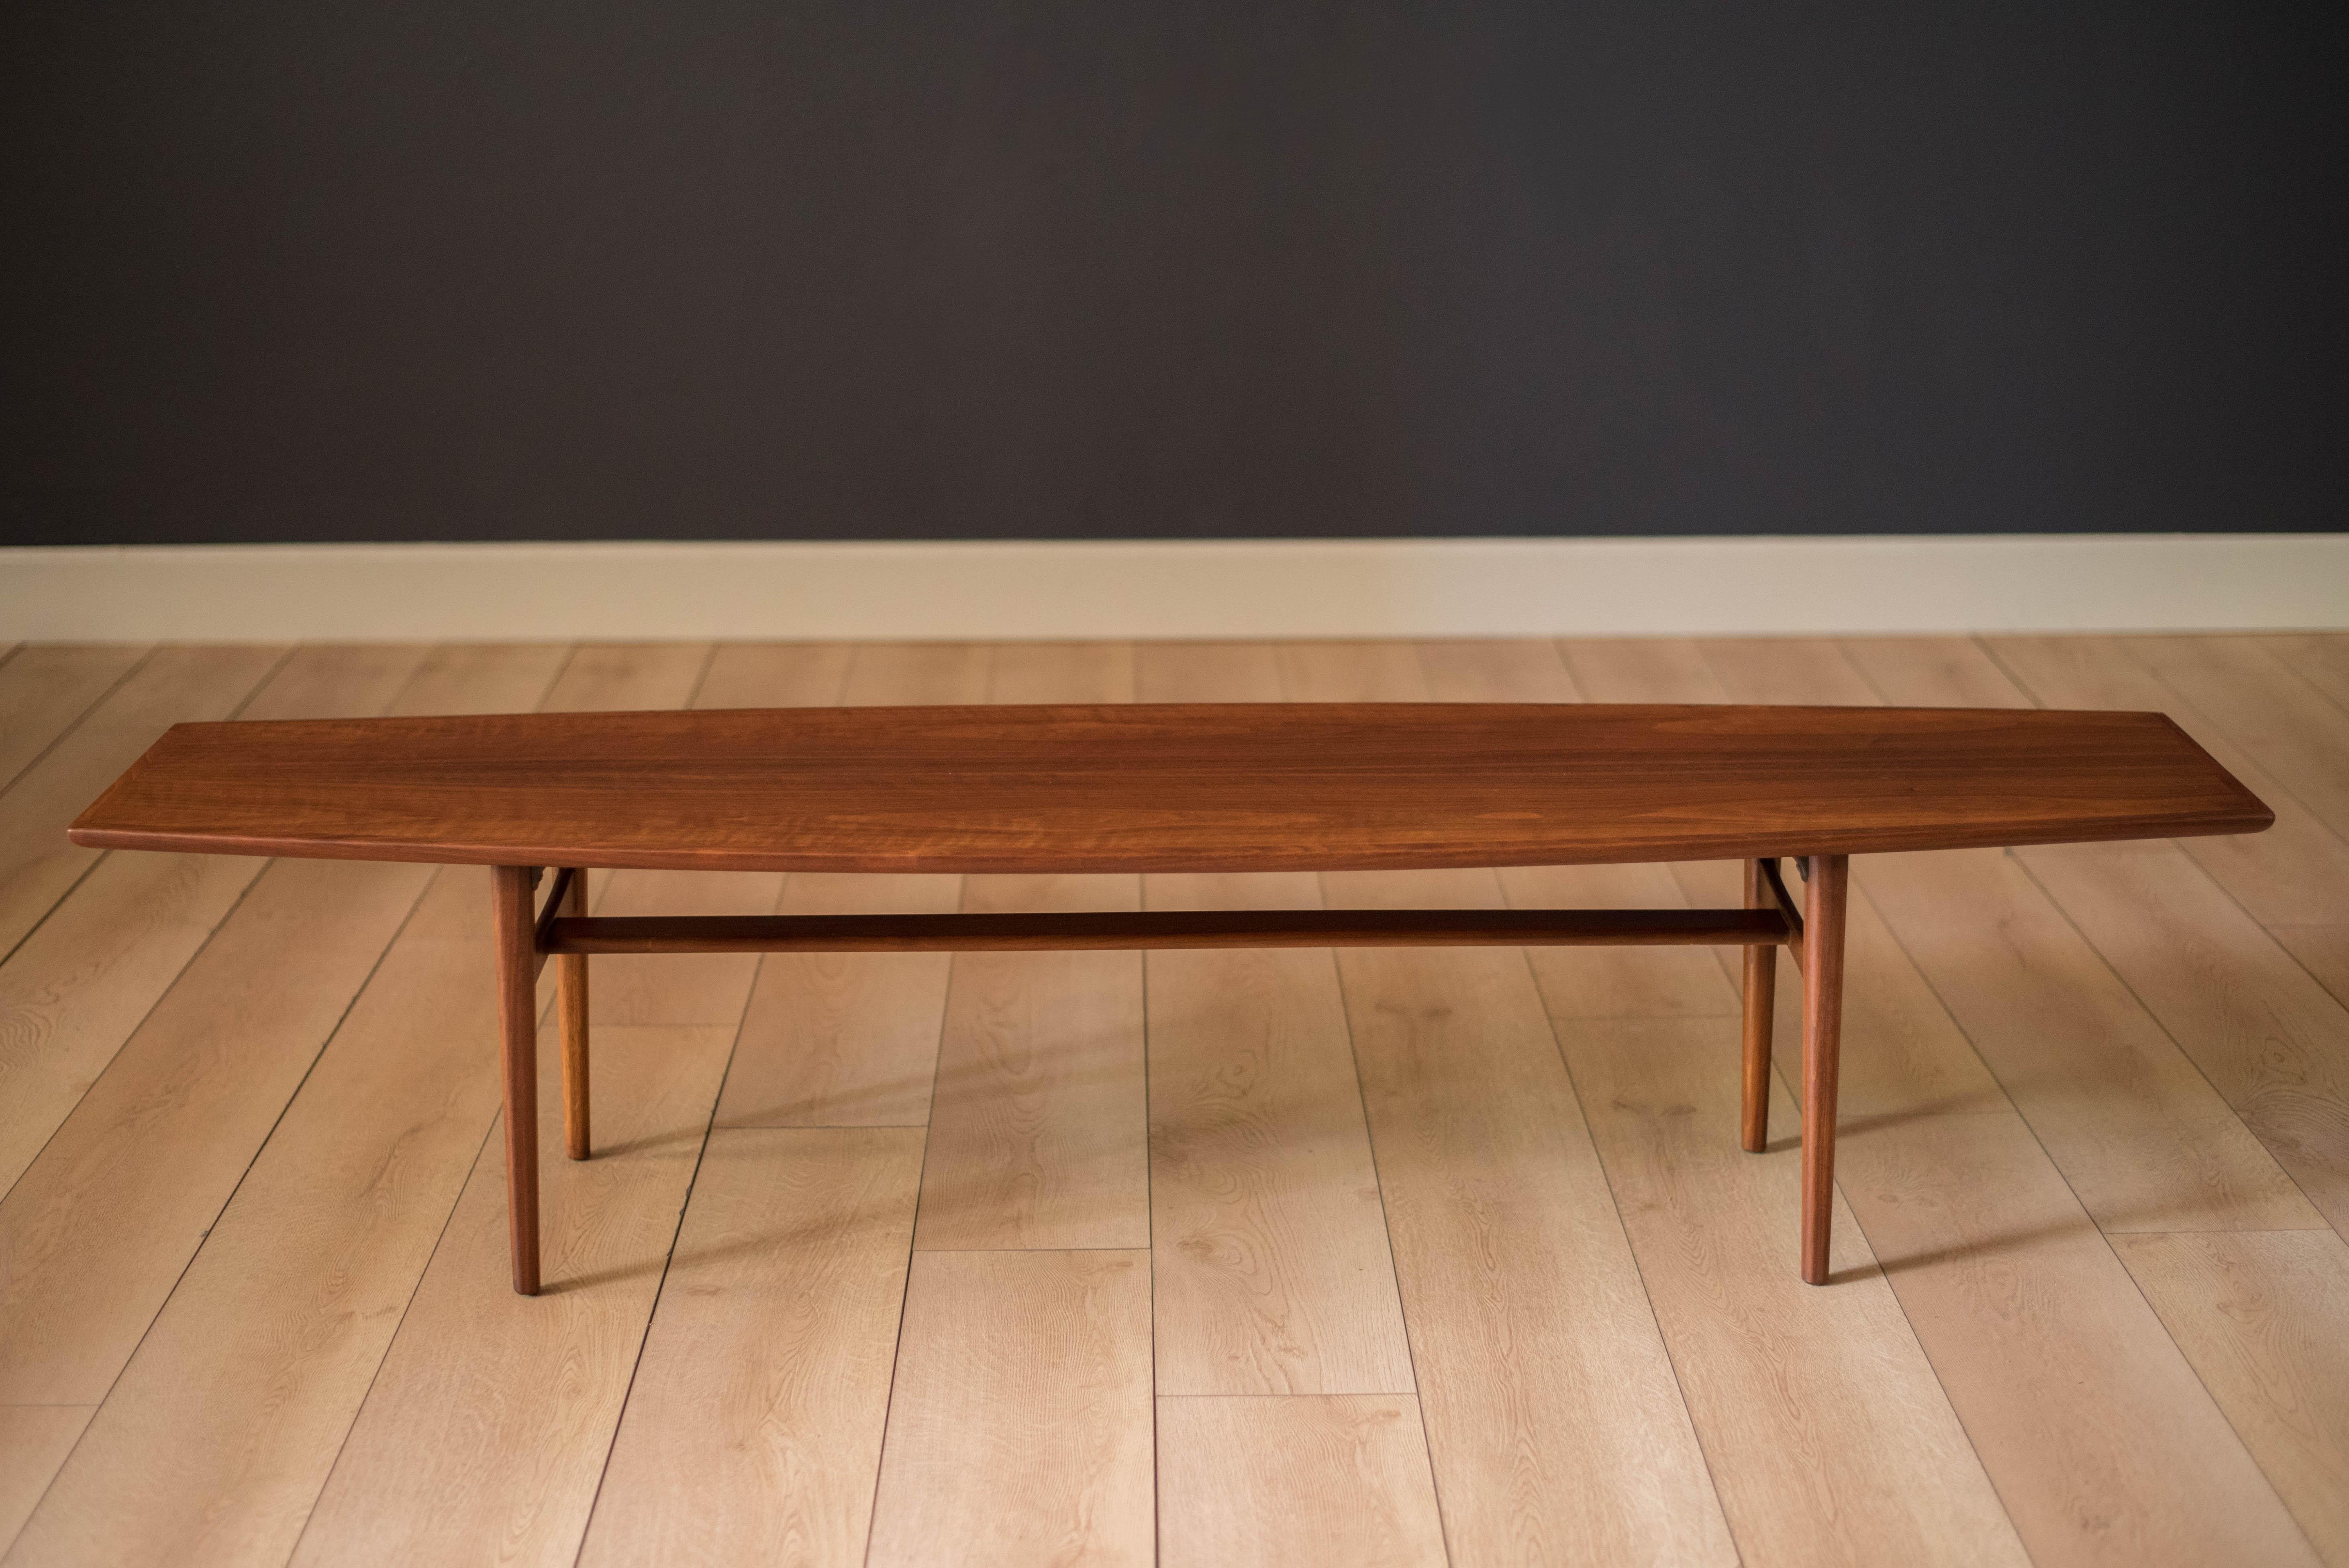 Vintage Scandia coffee table for Carlin, circa 1960s. This piece features a long walnut grain surfboard shaped top supported by a sturdy contoured base with tapered legs.



Offered by Mid Century Maddist